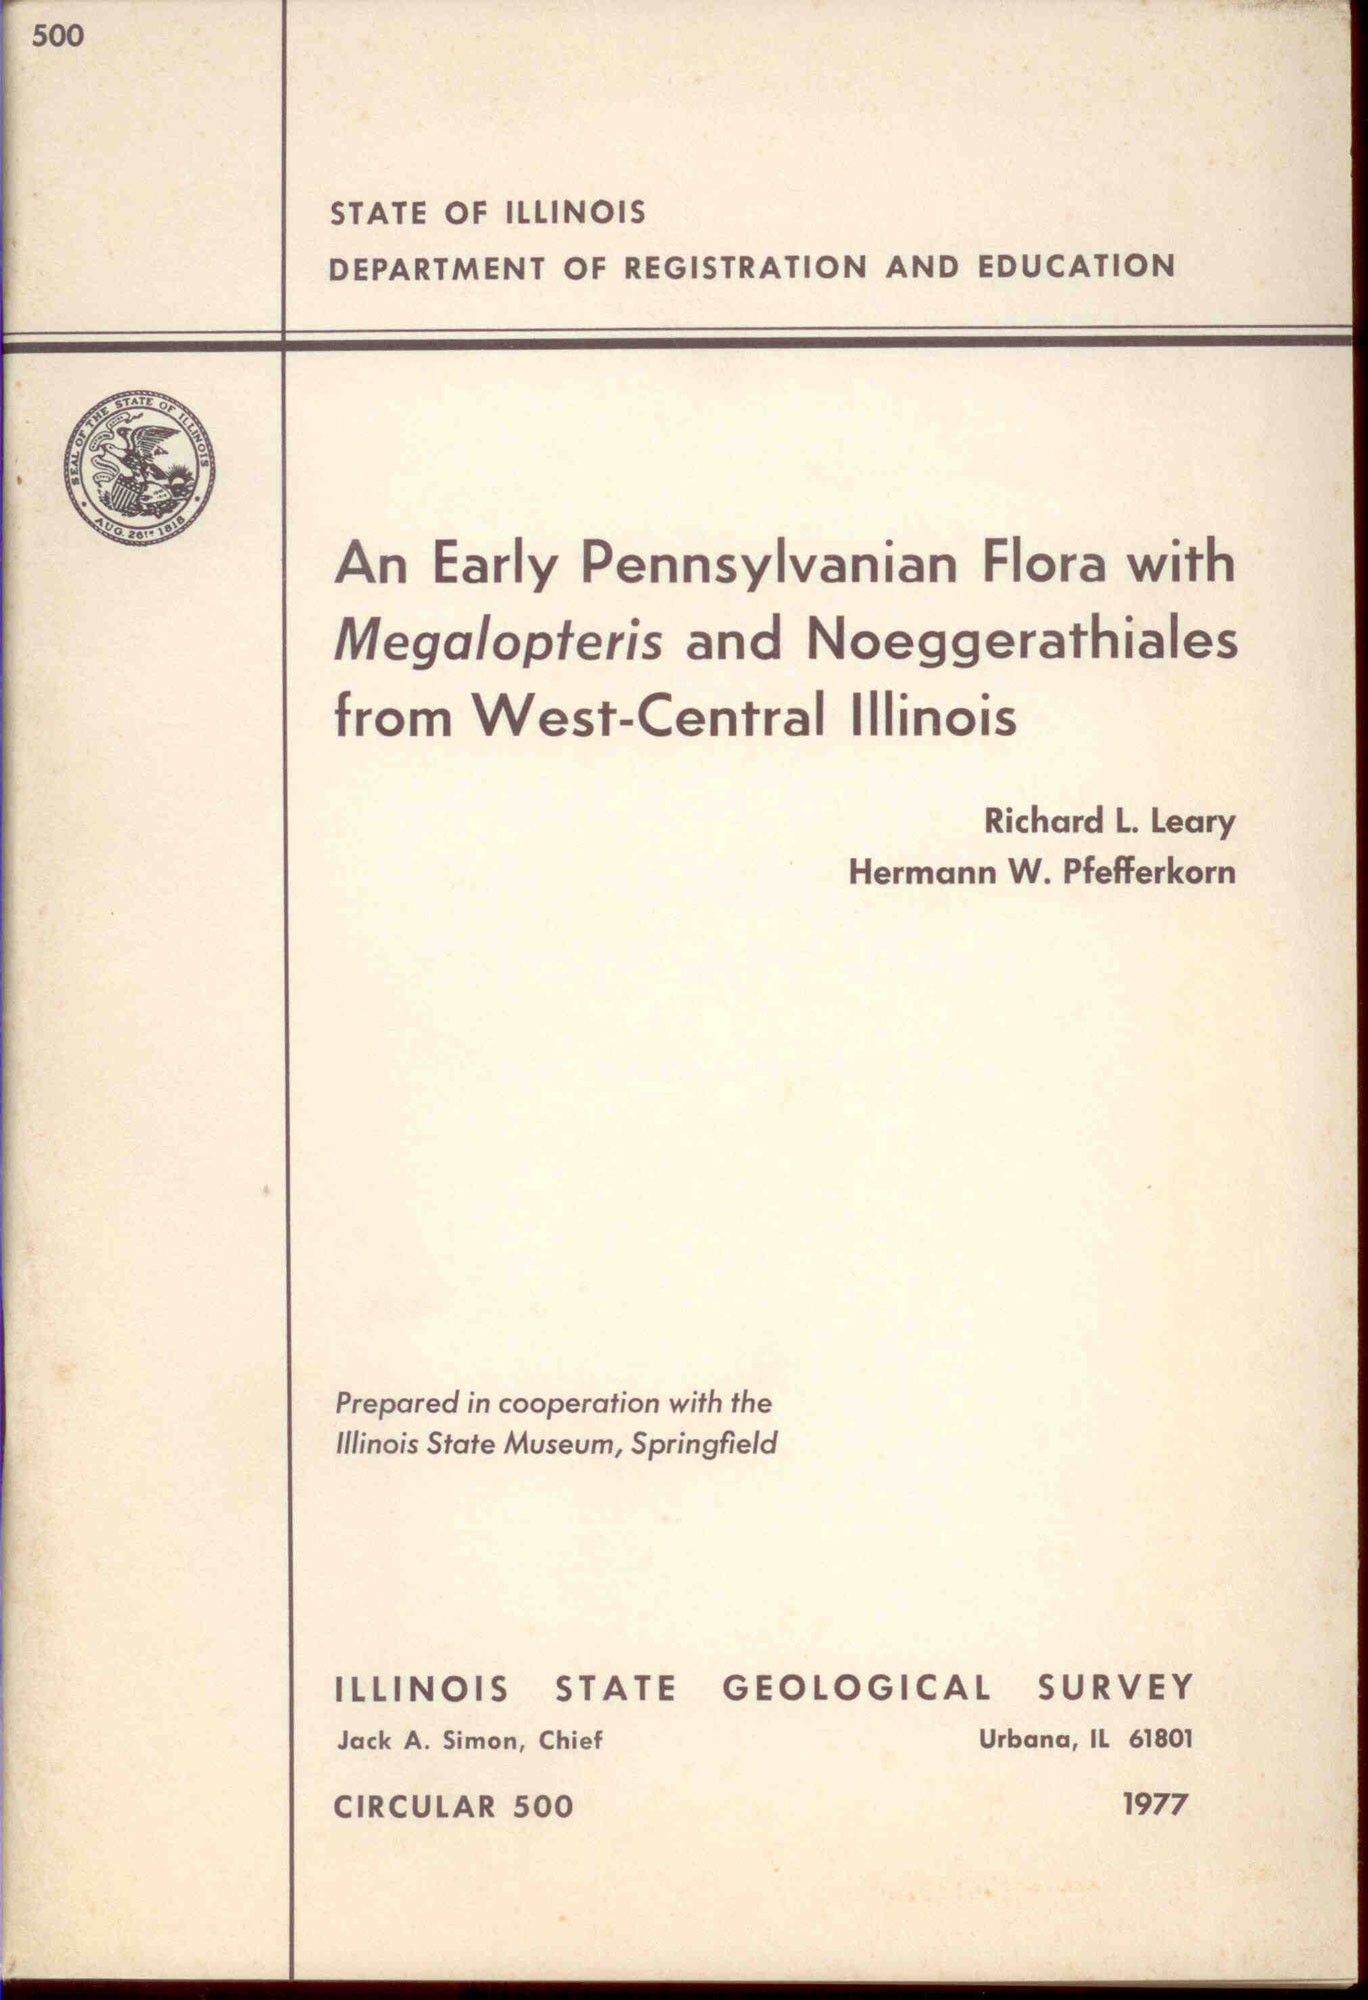 Leary R. L., Pfefferkorn, H. W.: An Early Pennsylvanian Flora with Megalopteris and Noeggerathiales from West-Central Illinois. 